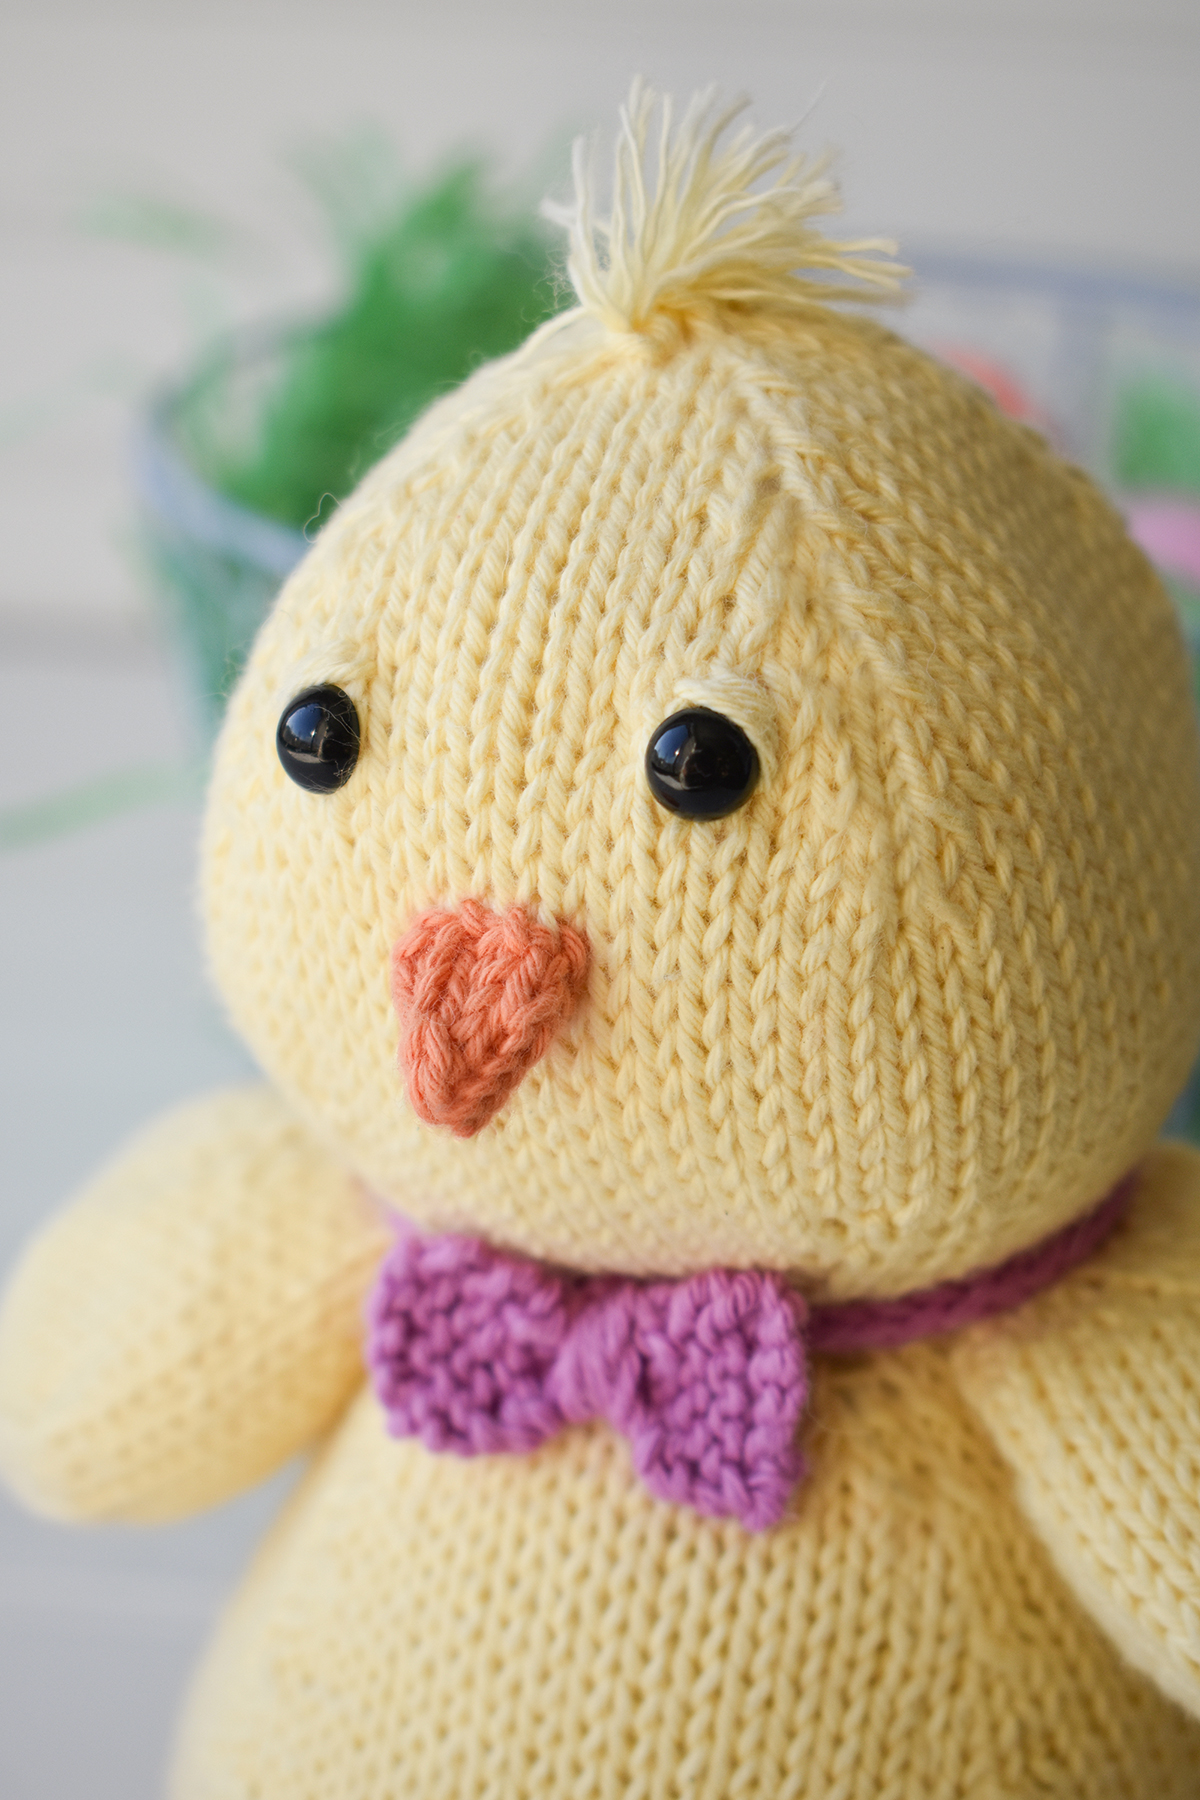 Puffy Pals Amigurumi Crochet Pattern (Easy Crochet Doll Patterns Book 8)  See more